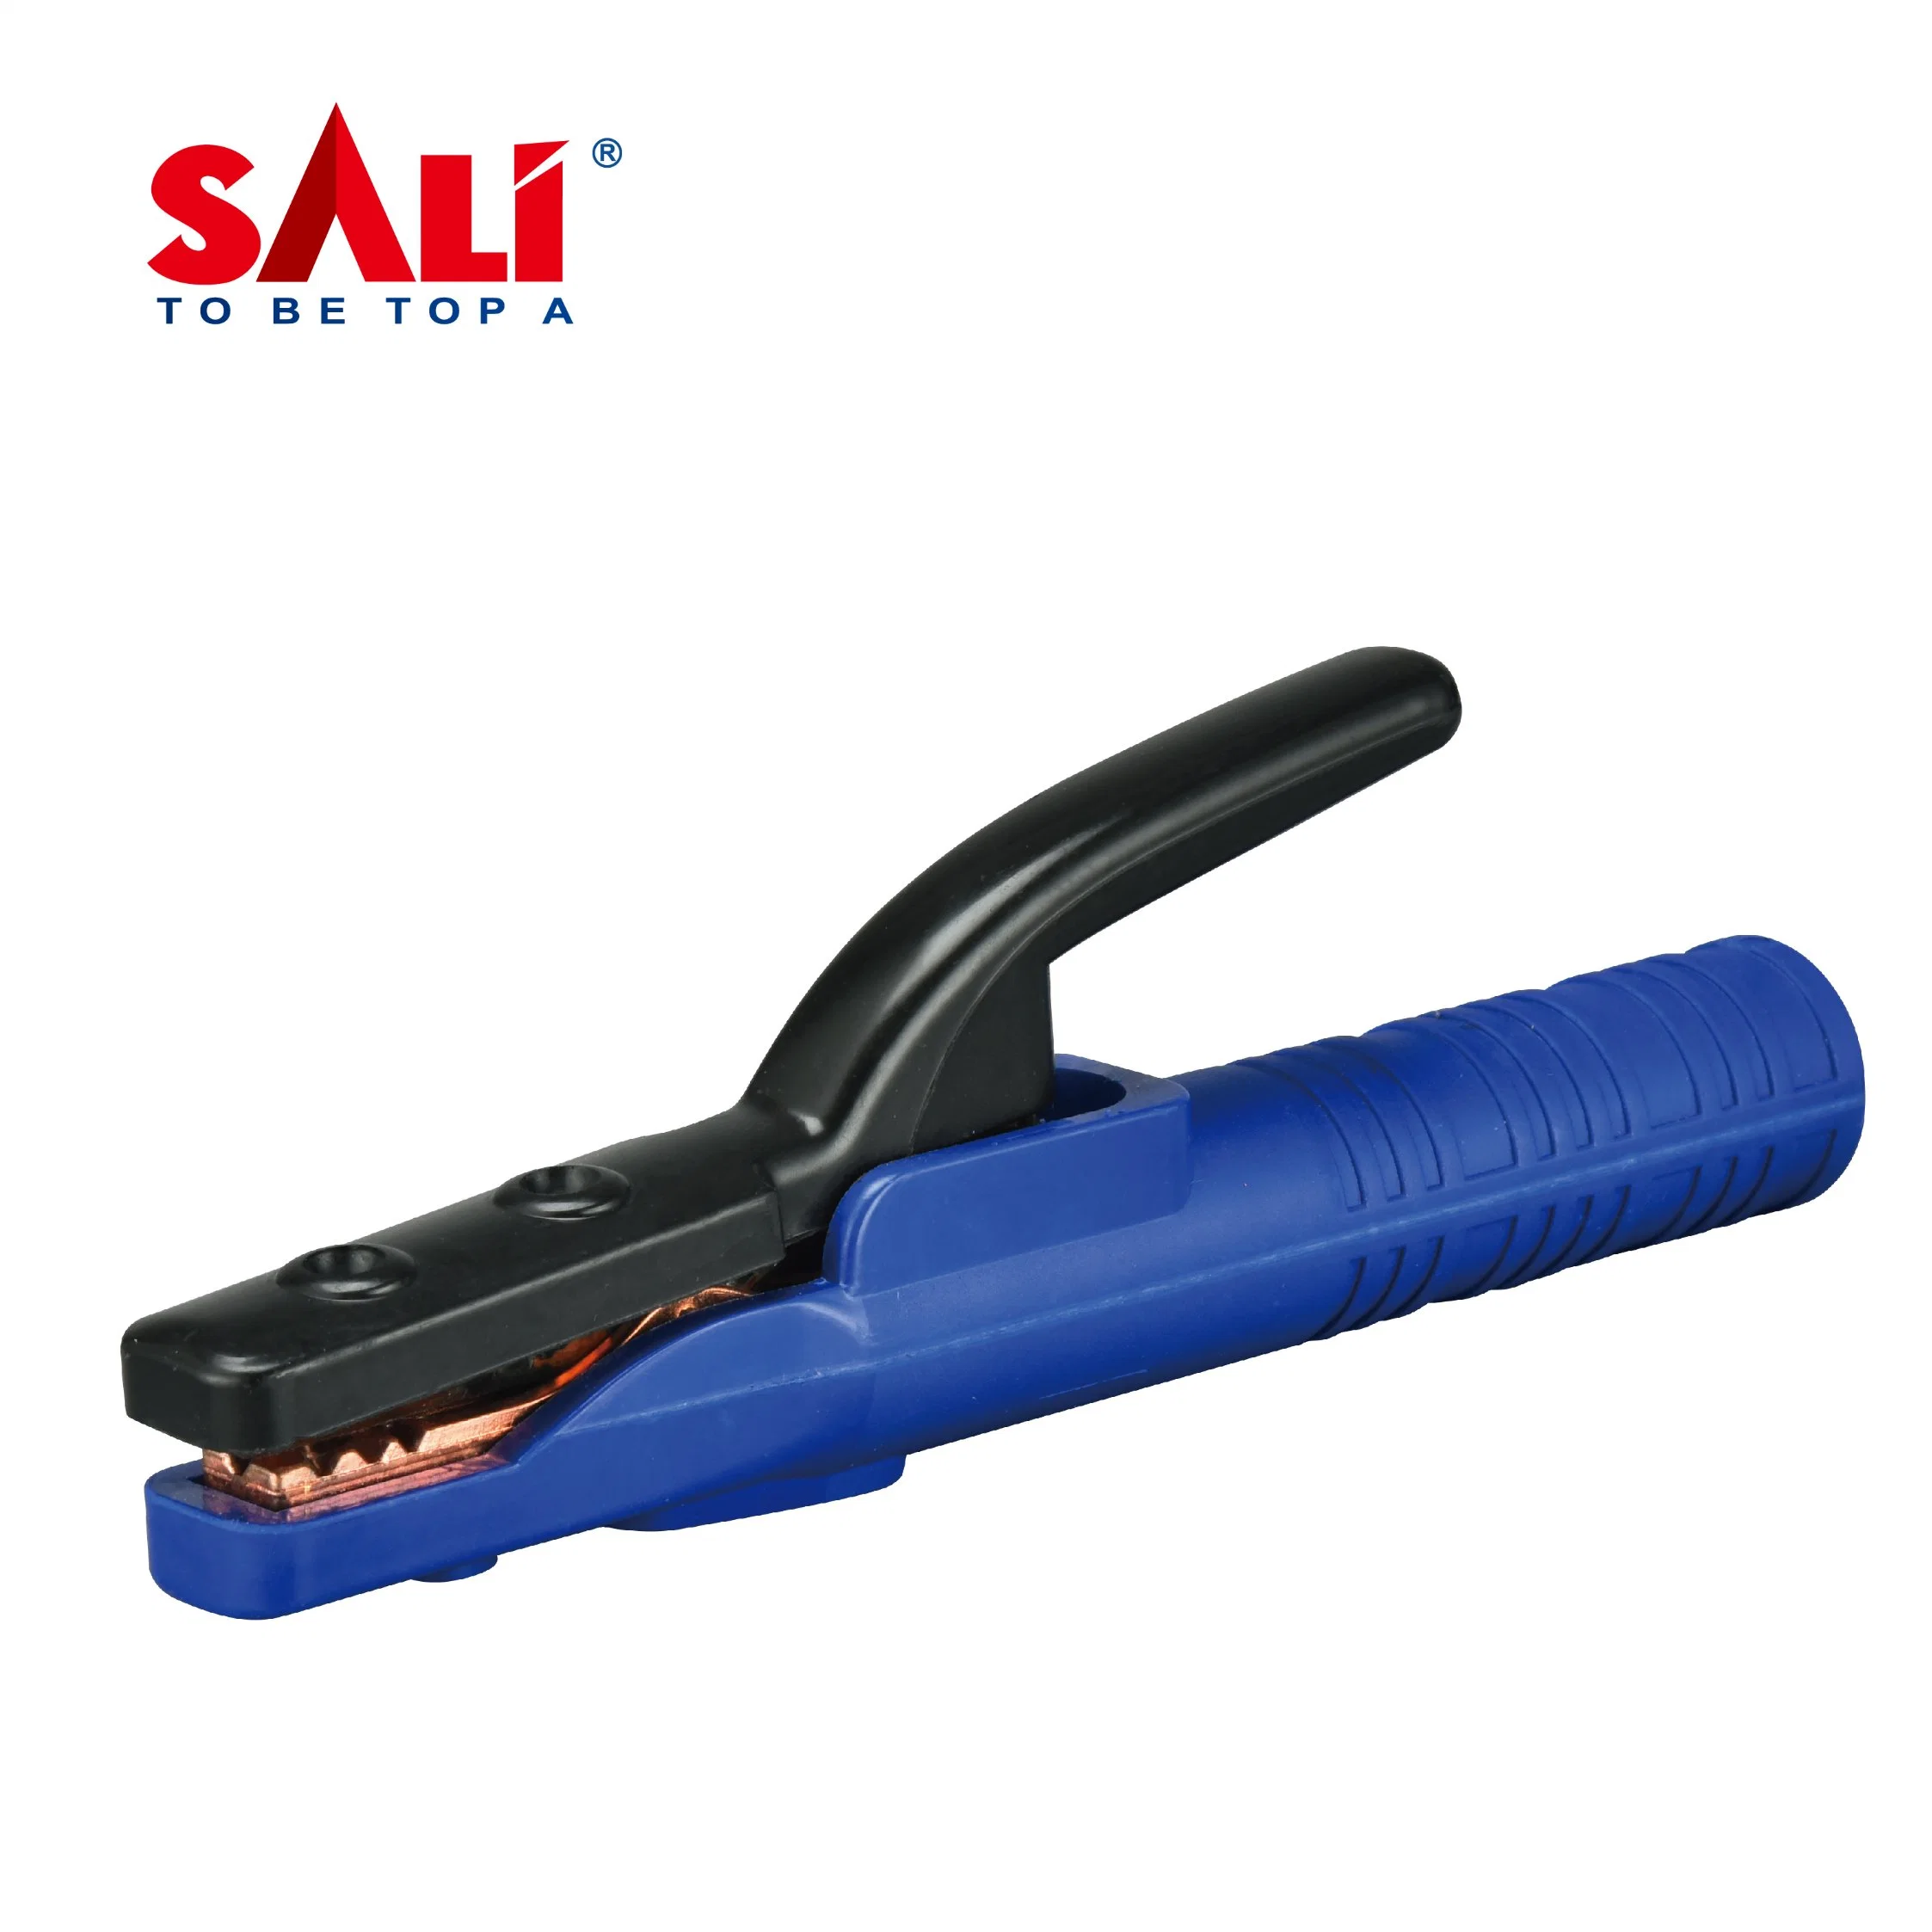 Sali 800A Professional High Quality Electrode Holder Hand Tools